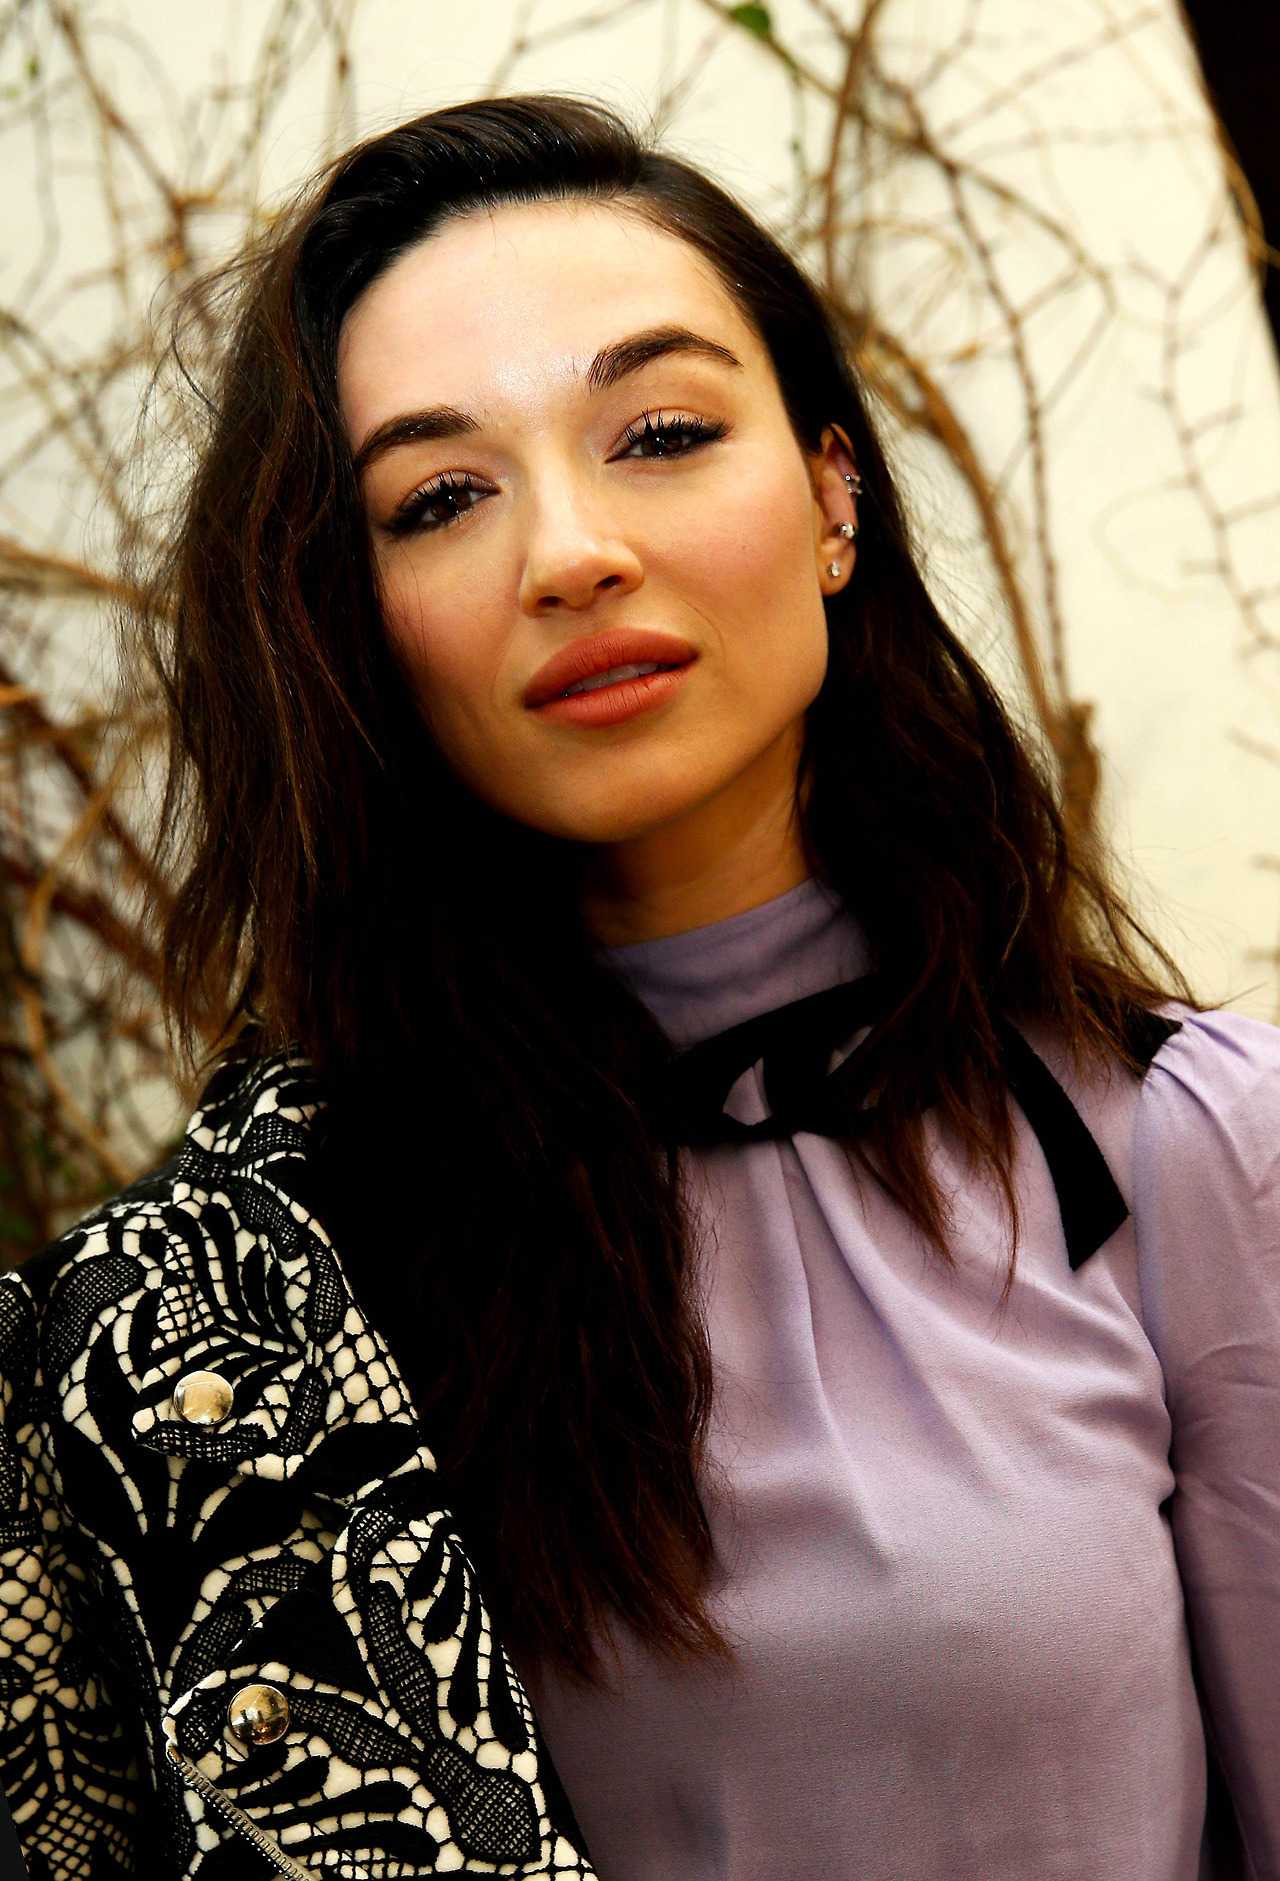 70+ Hot Pictures Of Crystal Reed That Are Sure To Make You Her Biggest Fan 12